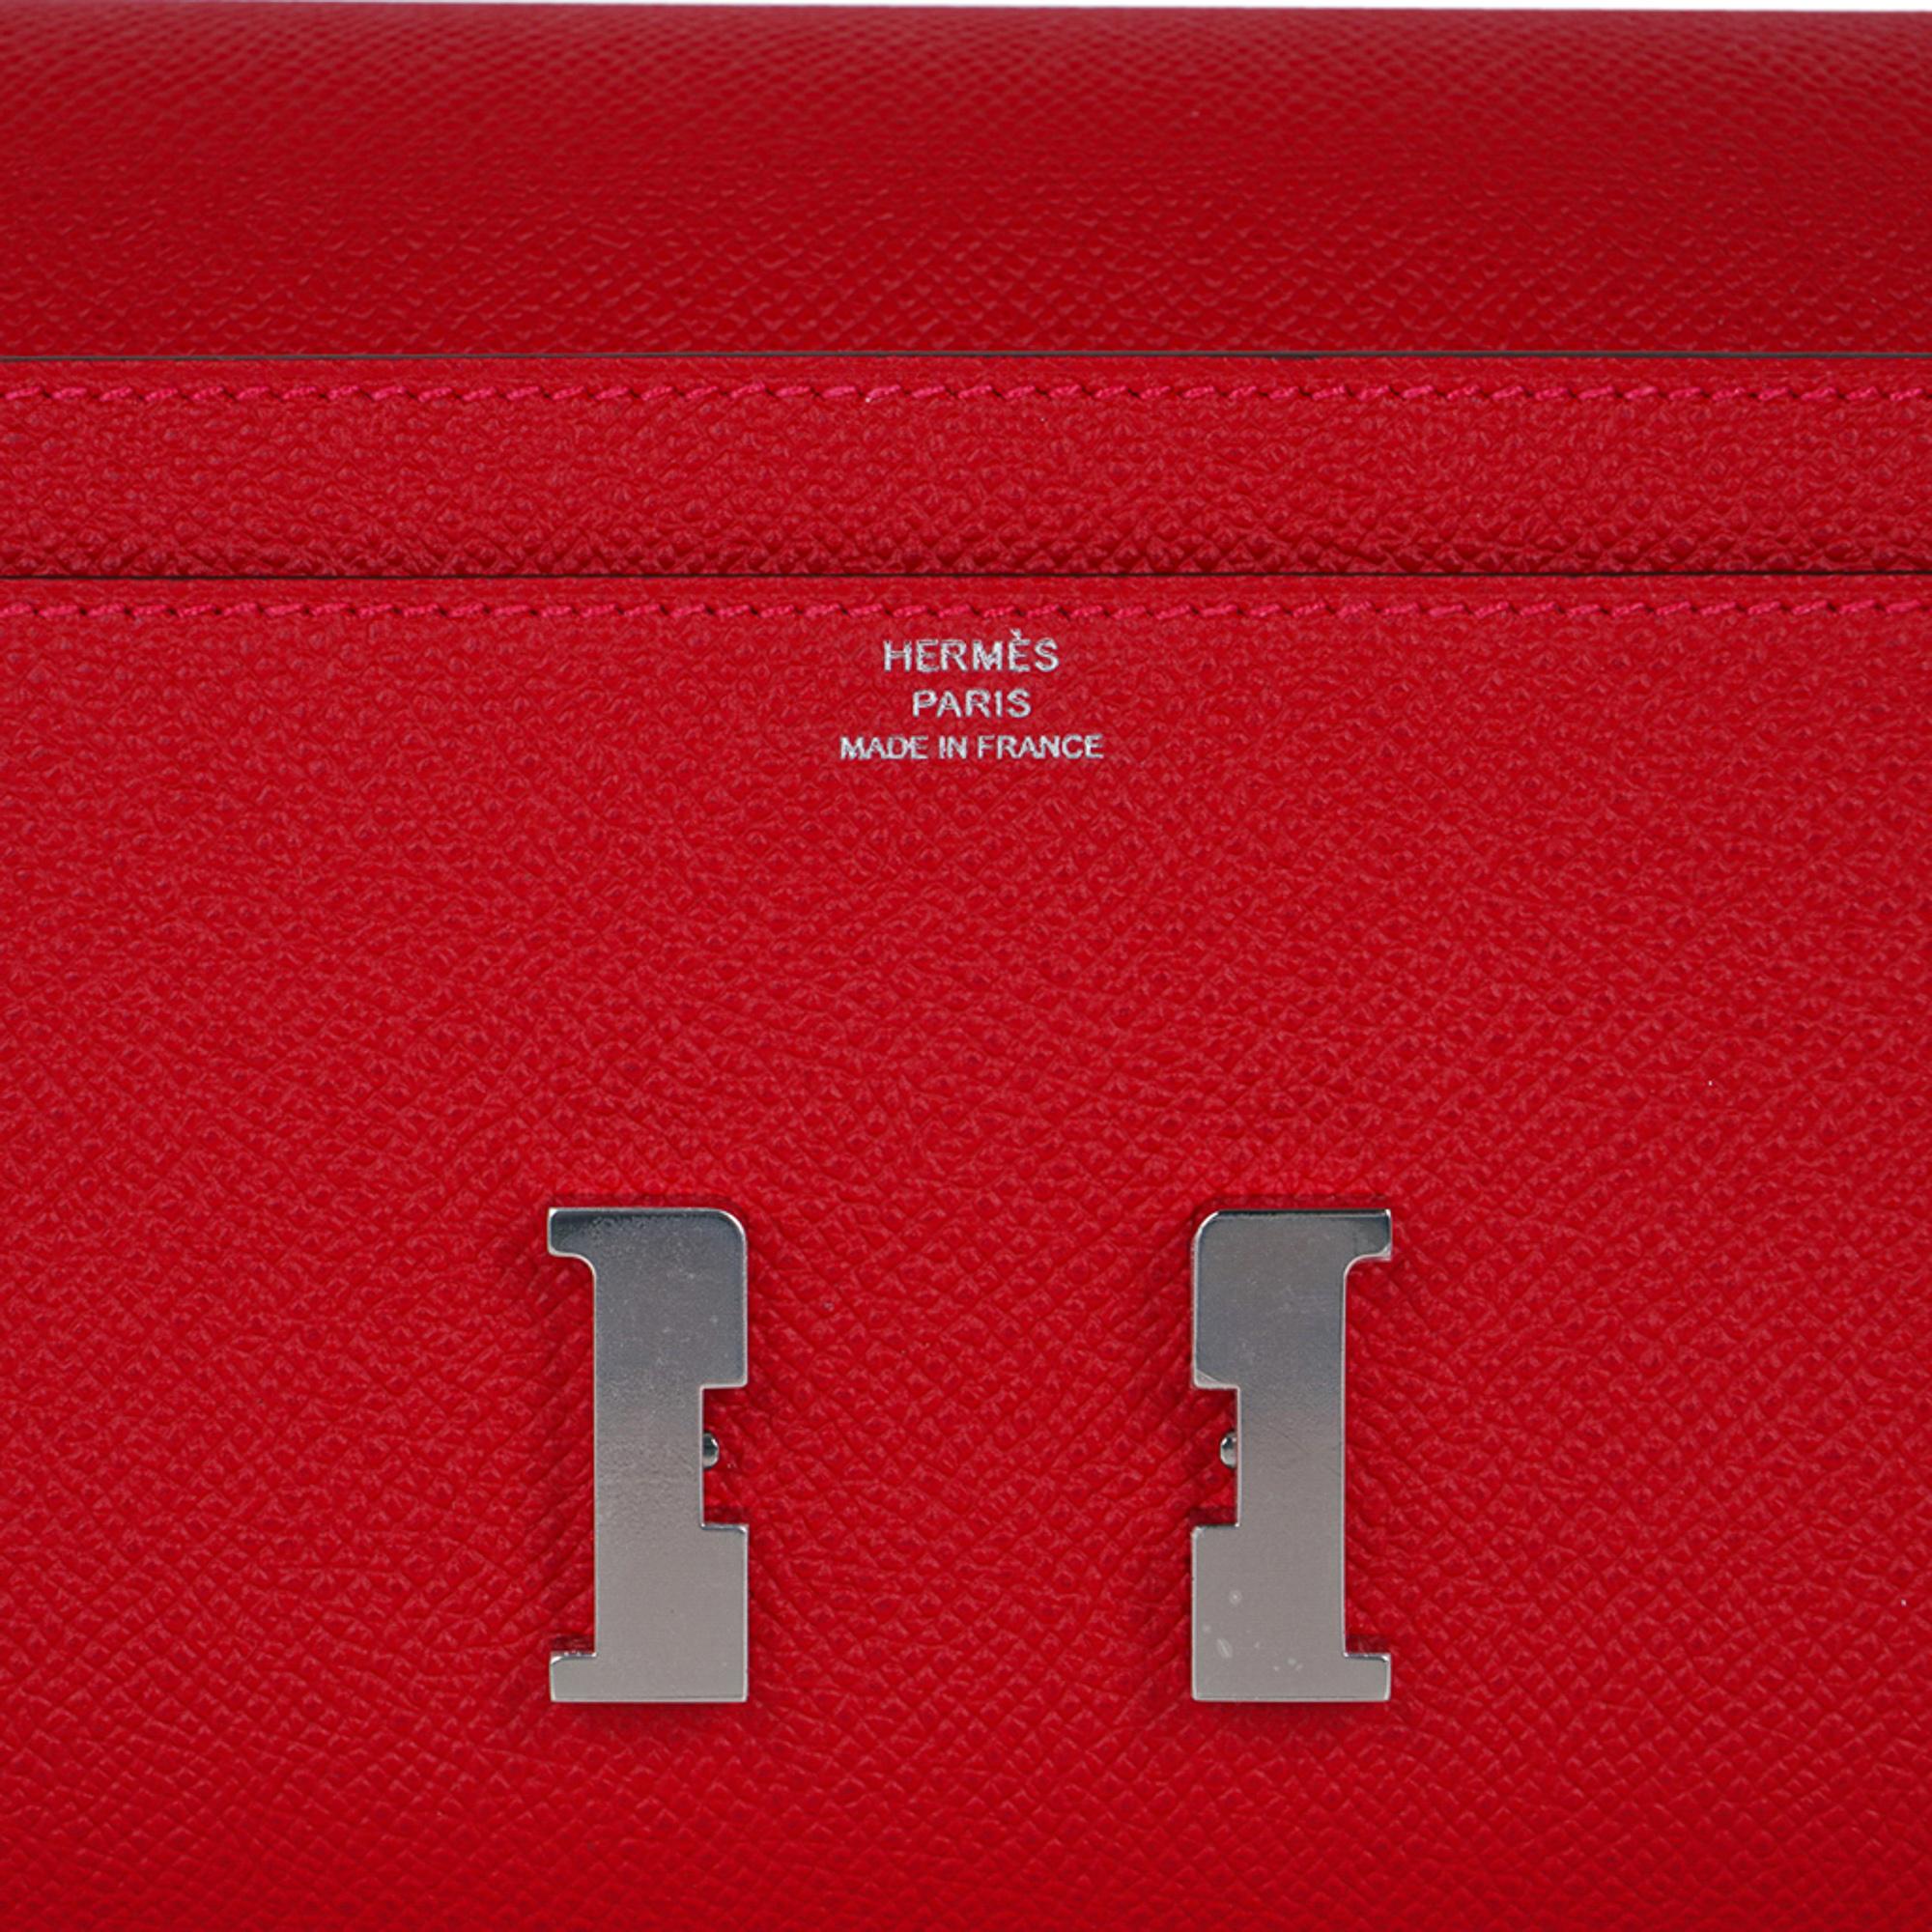 mightychic offer a guaranteed authentic coveted Hermes Constance Long To Go Wallet featured in Rouge Casaque.
Accentuated with Palladium hardware.
Detachable crossbody / shoulder strap converts this gorgeous Constance To Go Wallet  to a clutch.
The